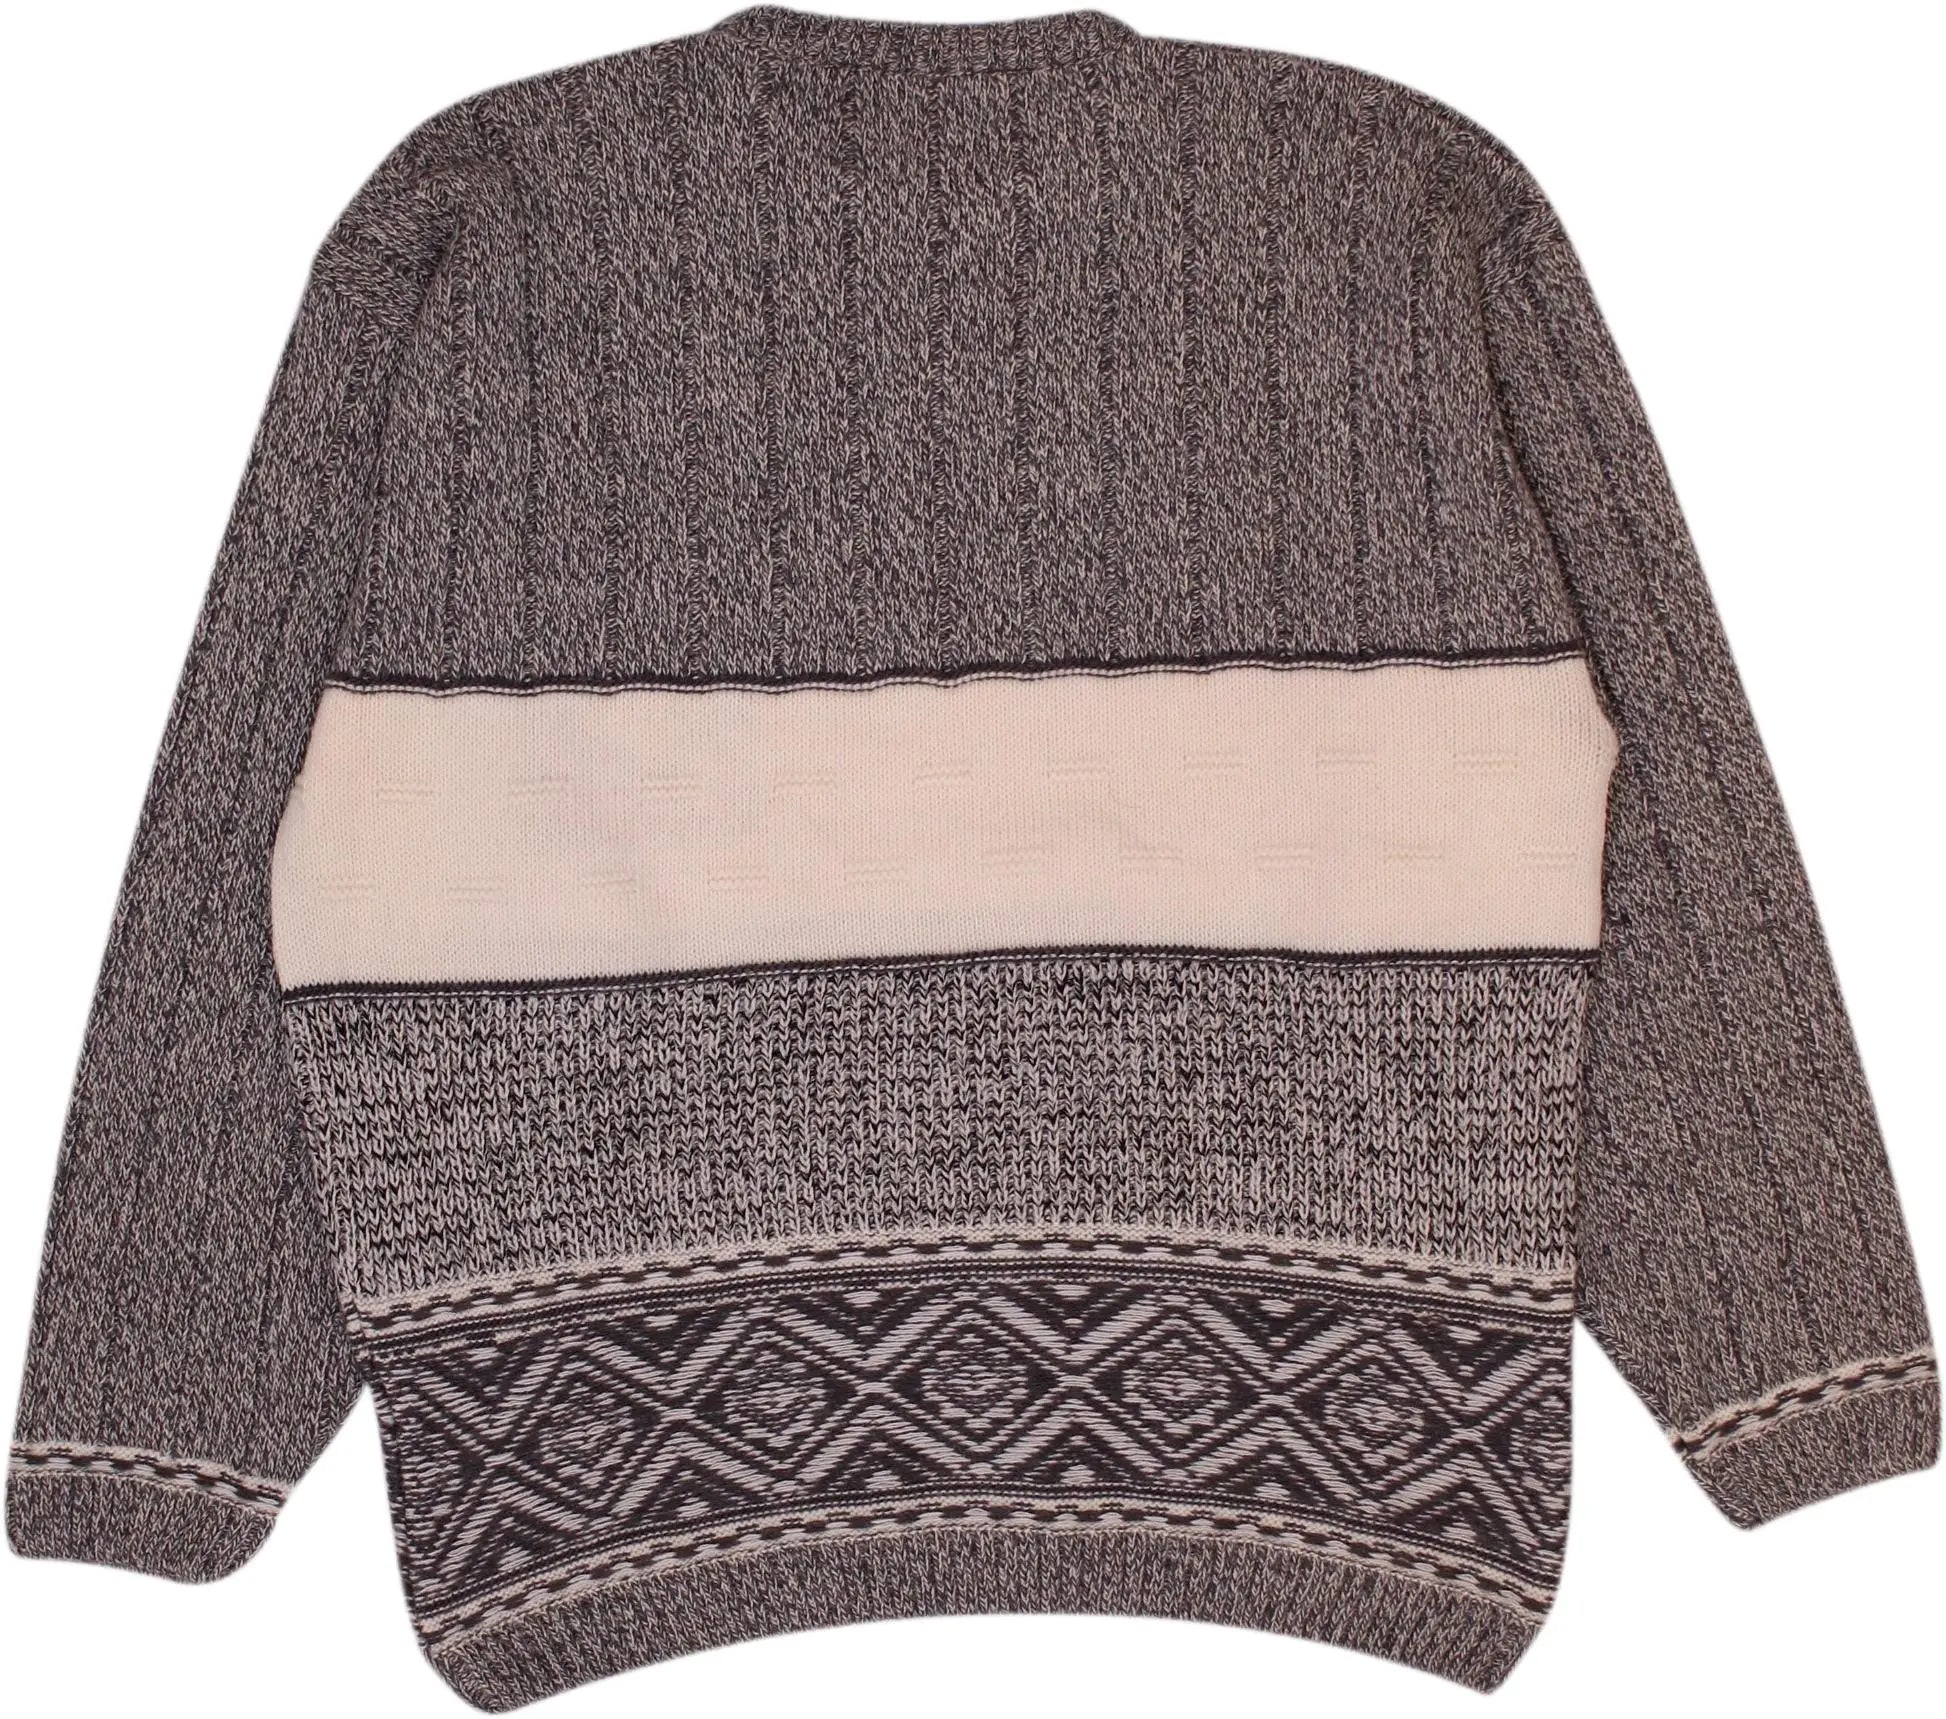 Unknown - Grey Knitted Sweater- ThriftTale.com - Vintage and second handclothing